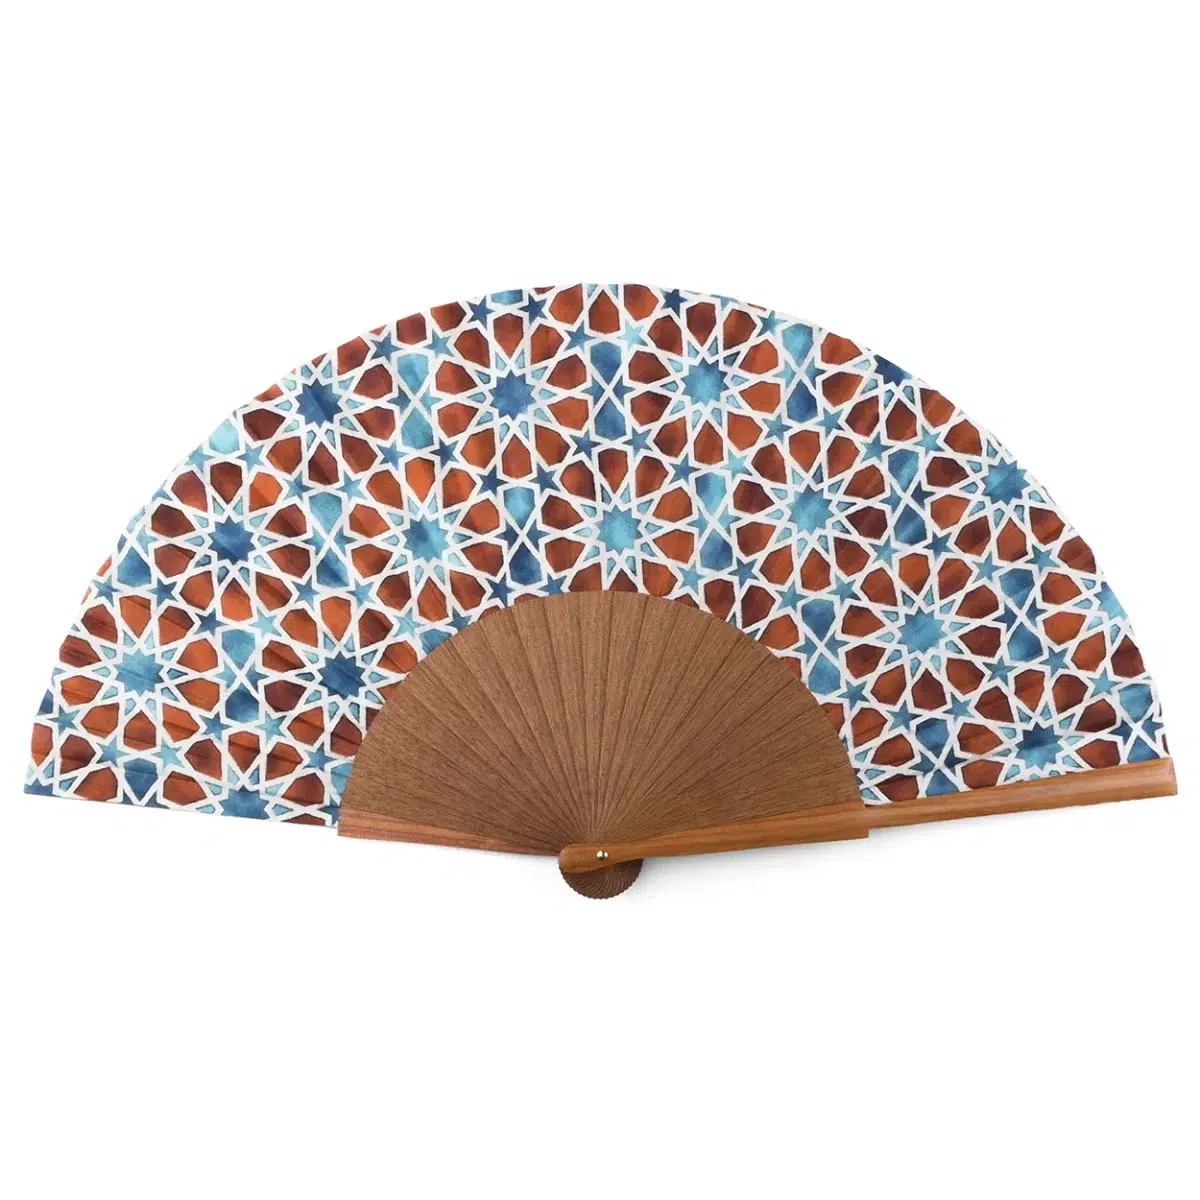 Blue and brown silk hand fan with islamic art inspired print